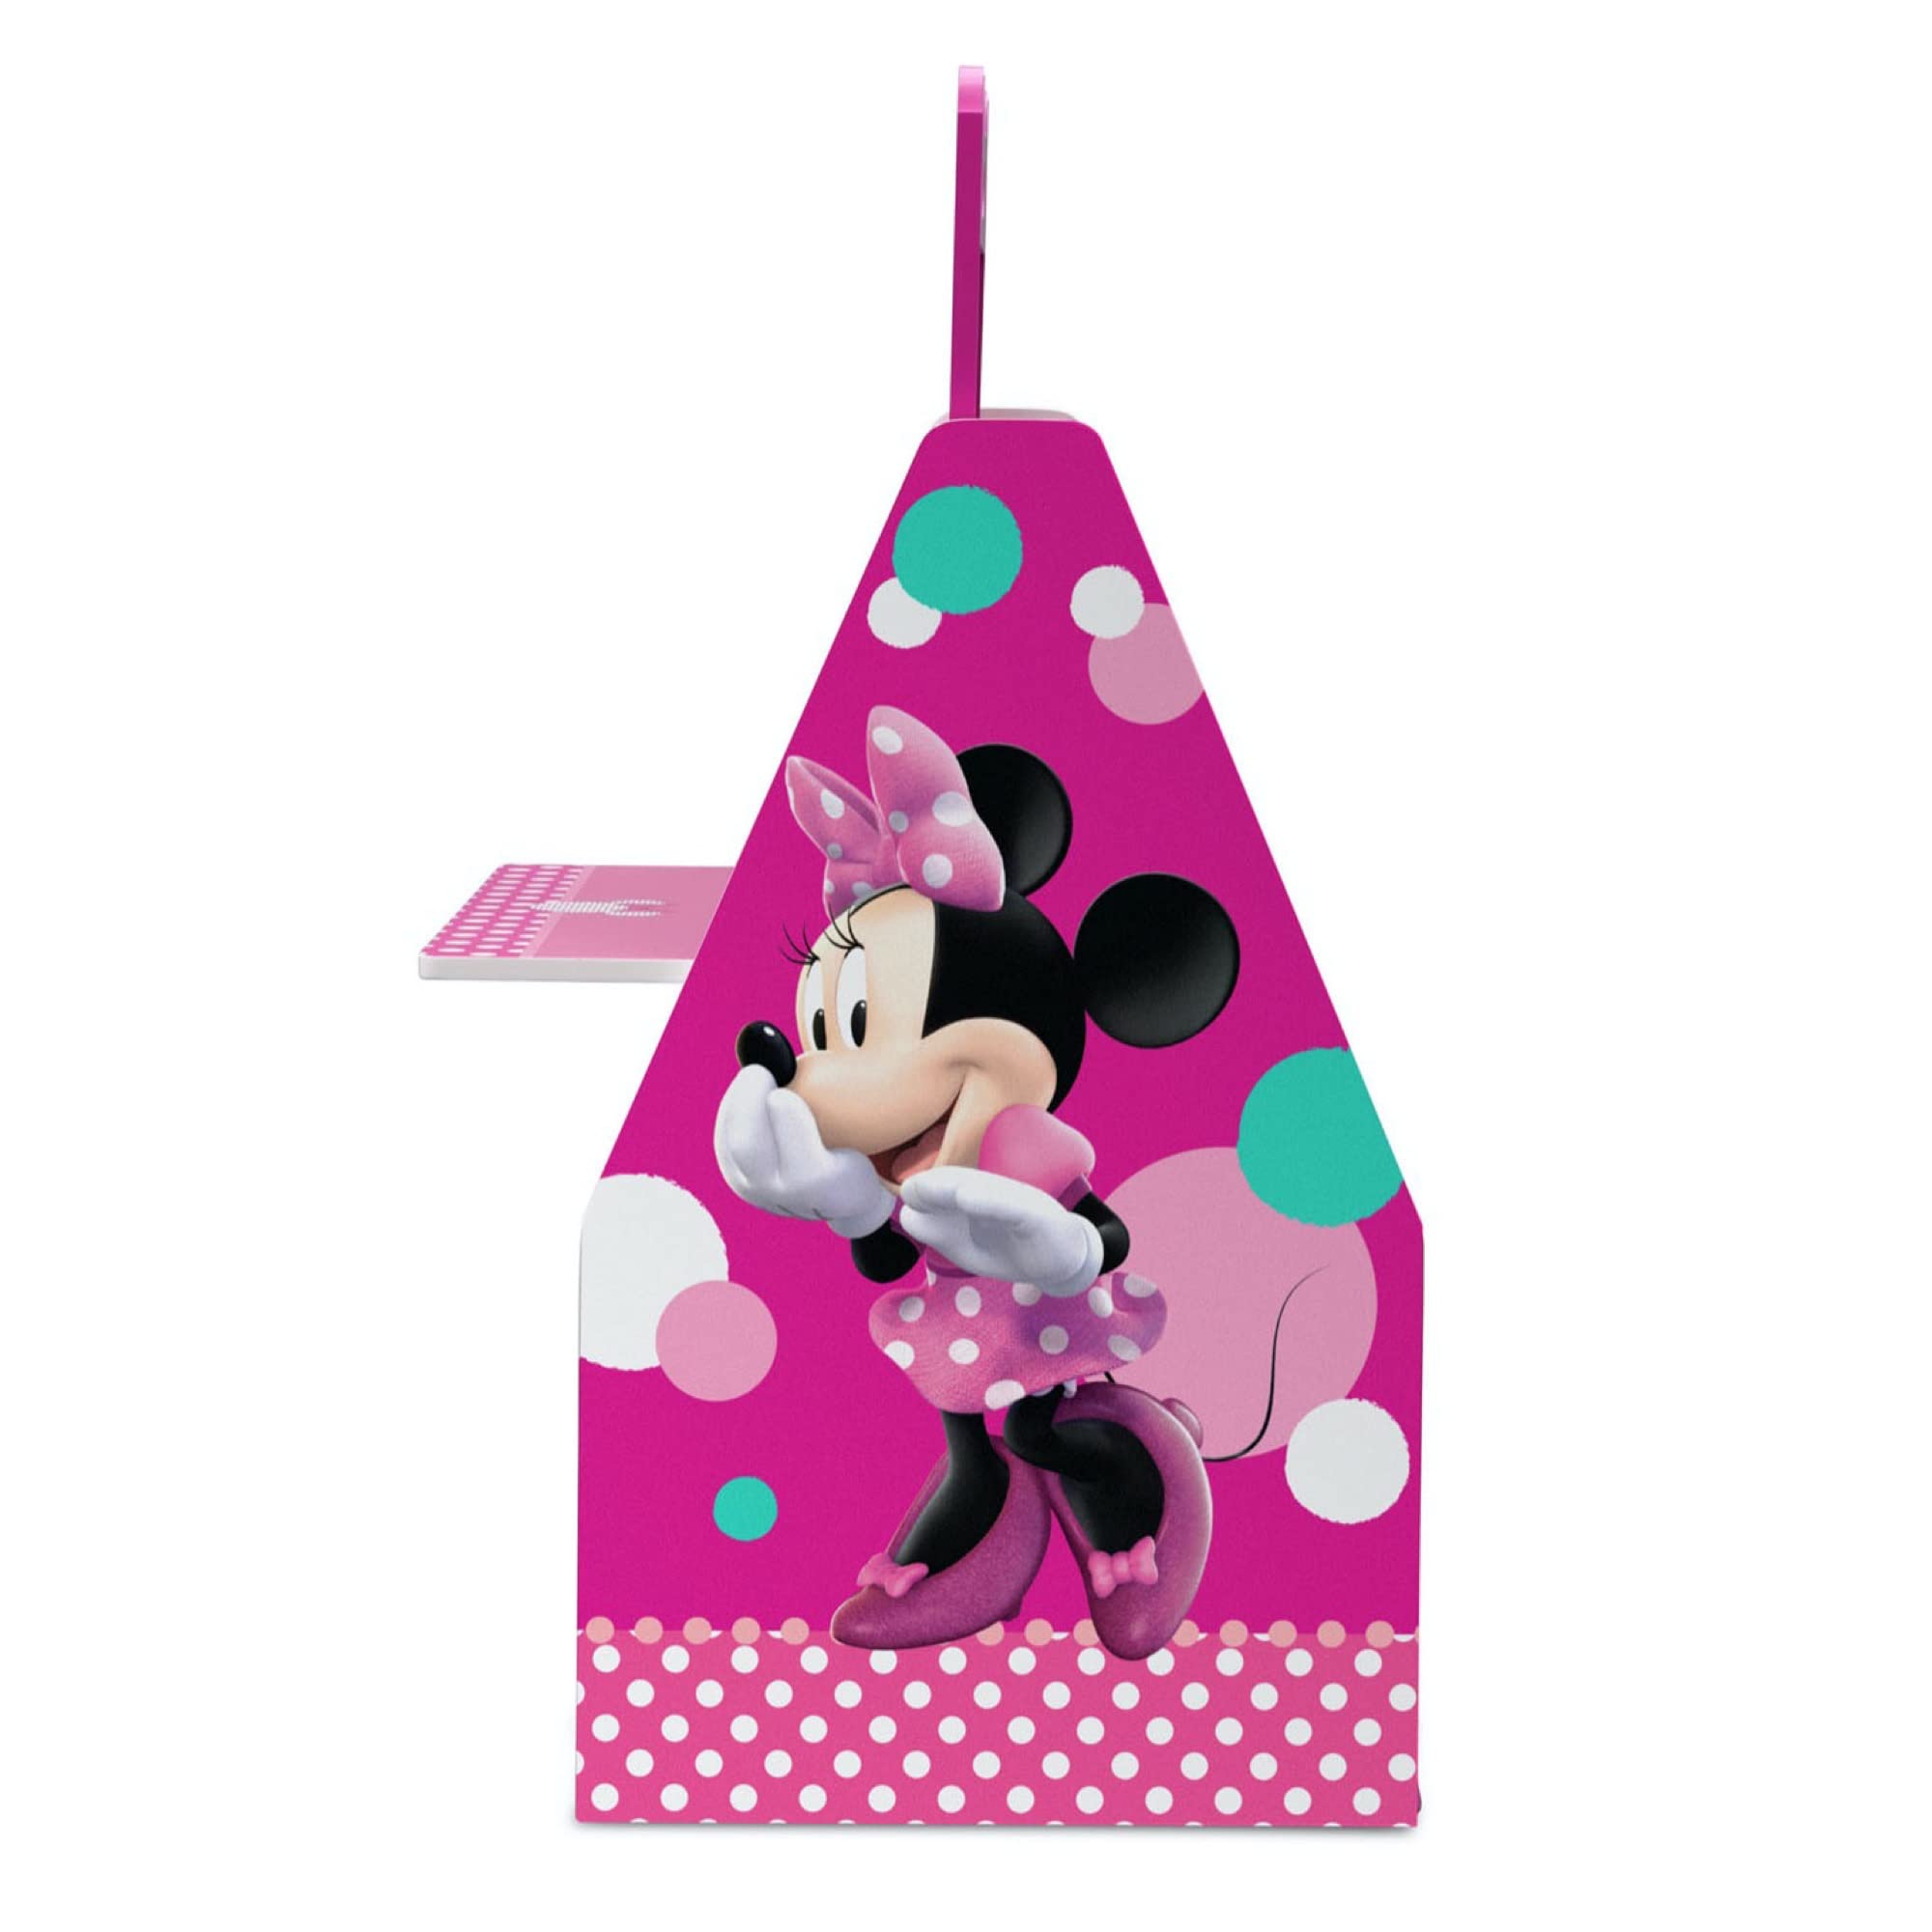 Delta Children Kids Easel and Play Station – Ideal for Arts & Crafts, Drawing, Homeschooling and More - Greenguard Gold Certified, Disney Minnie Mouse